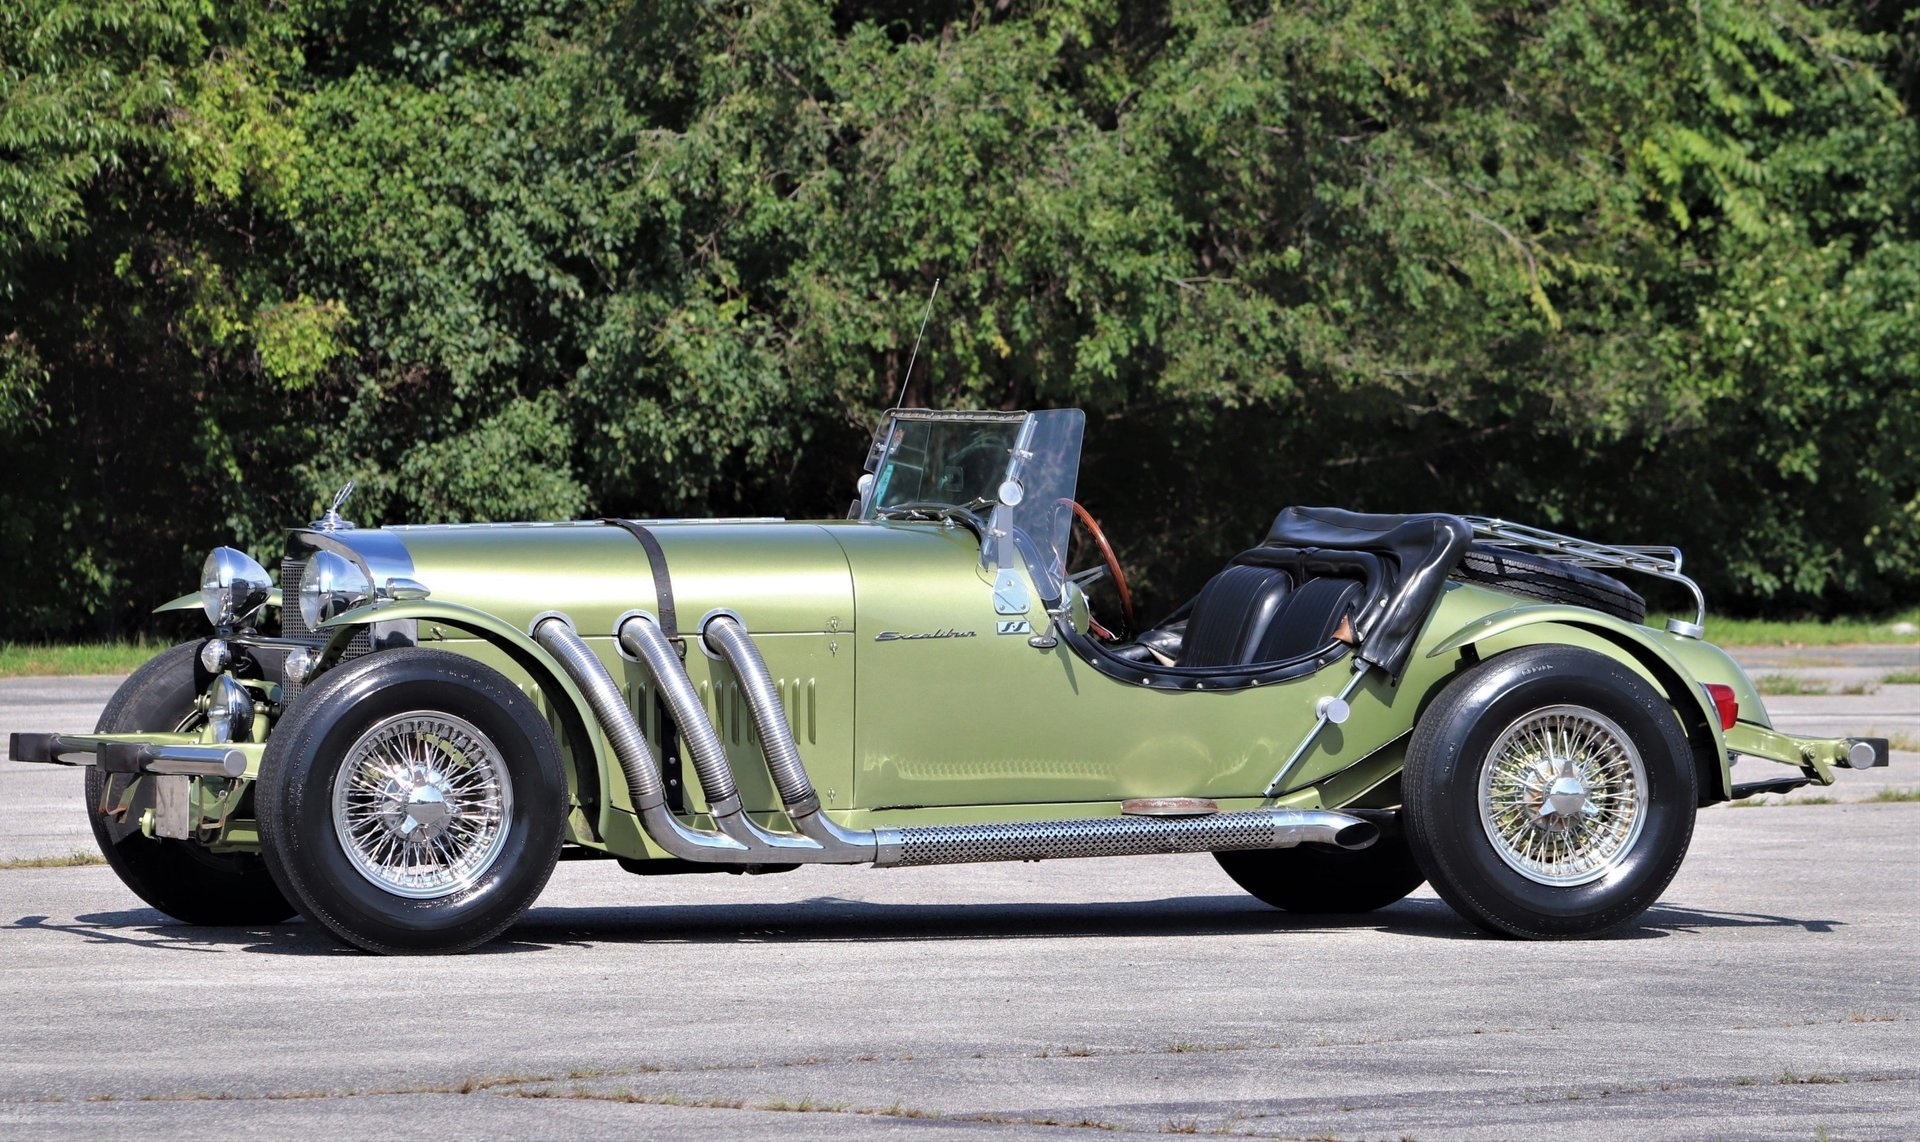 196 Excalibur Series I SS Roadster